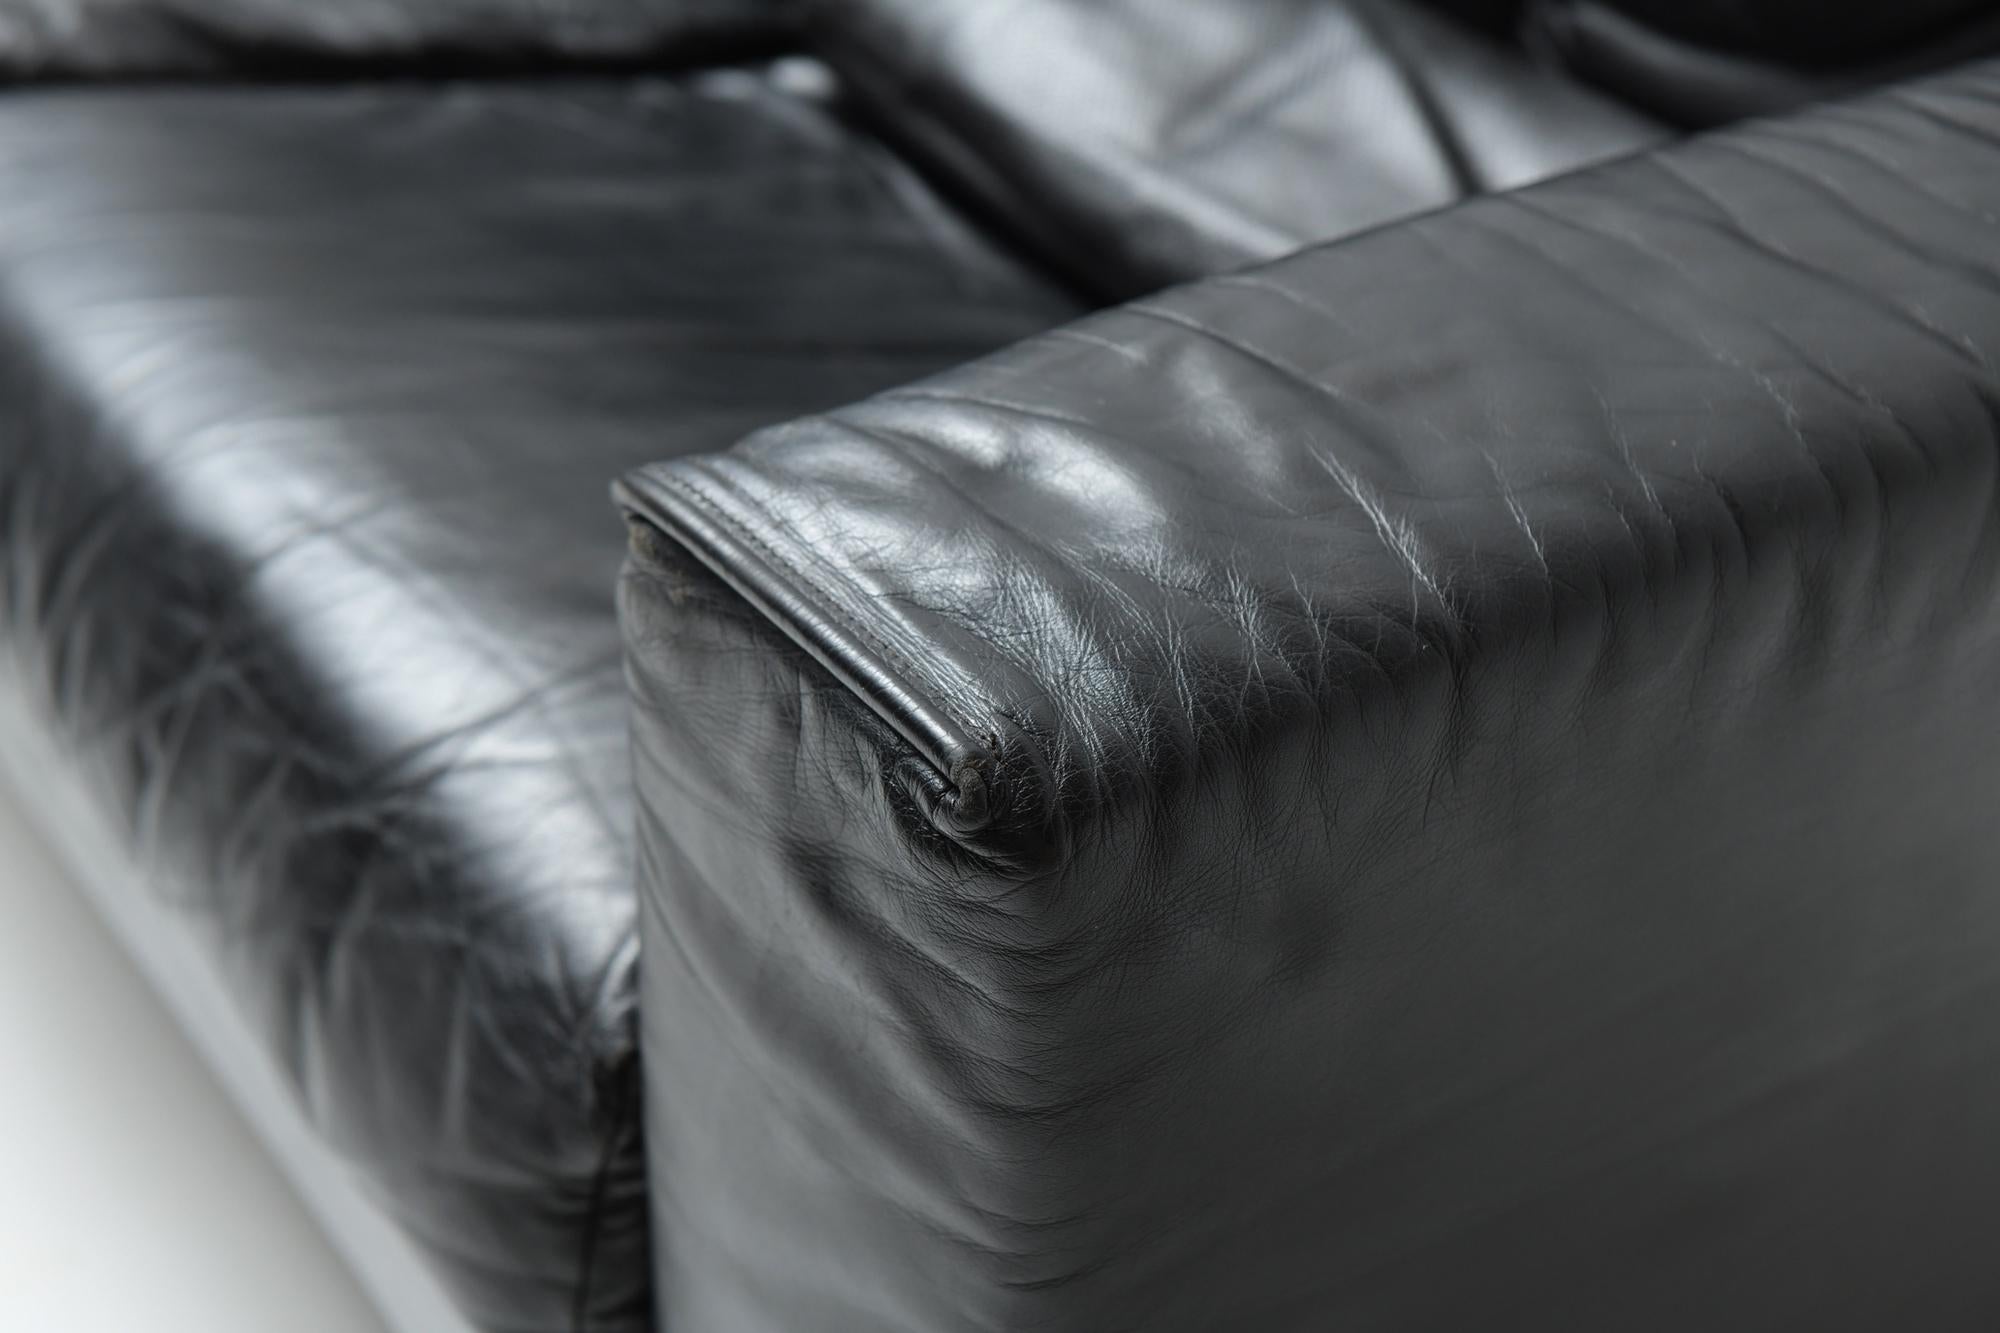 Italian Stunning Excelsior sofa in black leather by Mario Bellini for B&B Italy, 1985.  For Sale